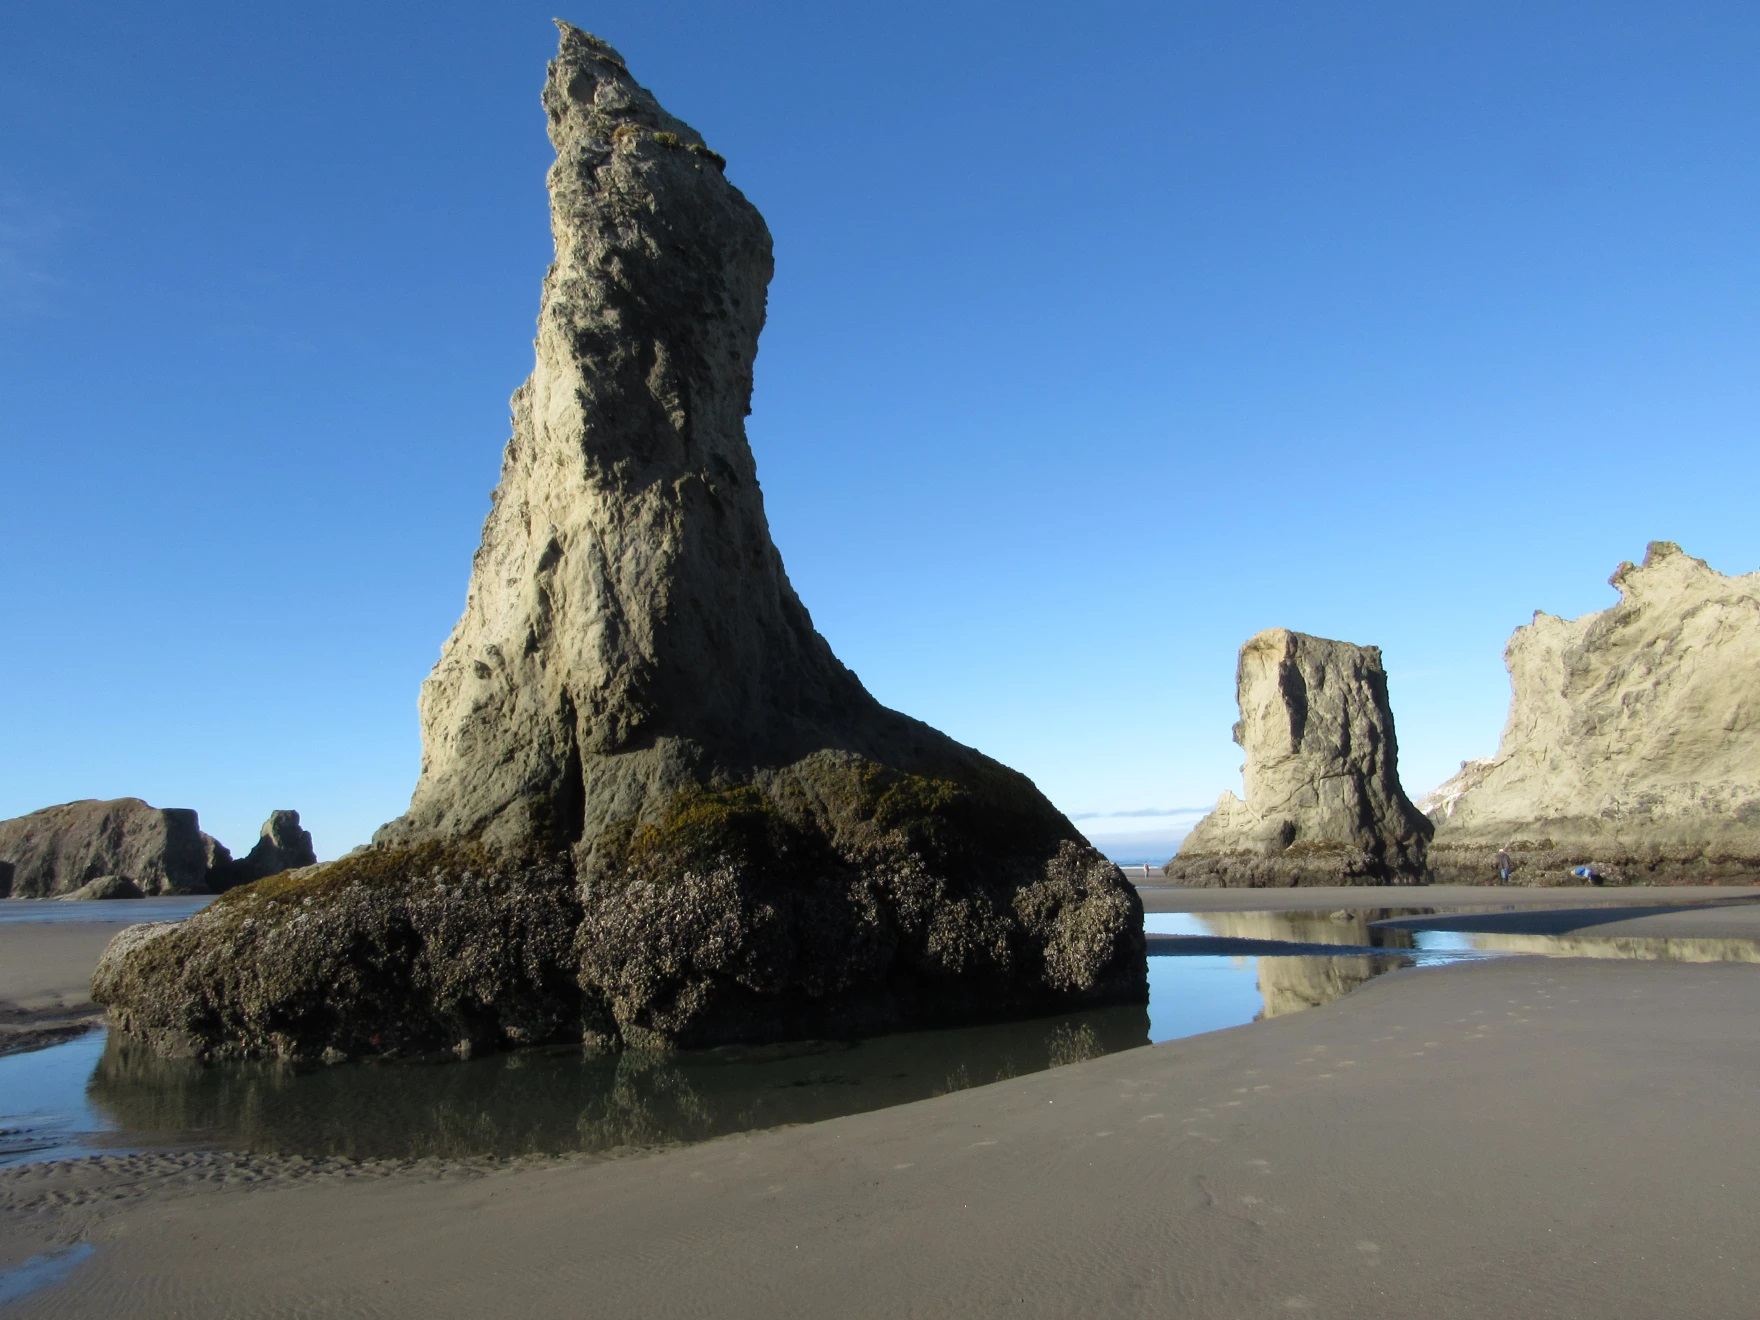 Giant rocks make homes for black oystercatcher nests on the shore in Bandon, Ore., on the southern Oregon Coast.